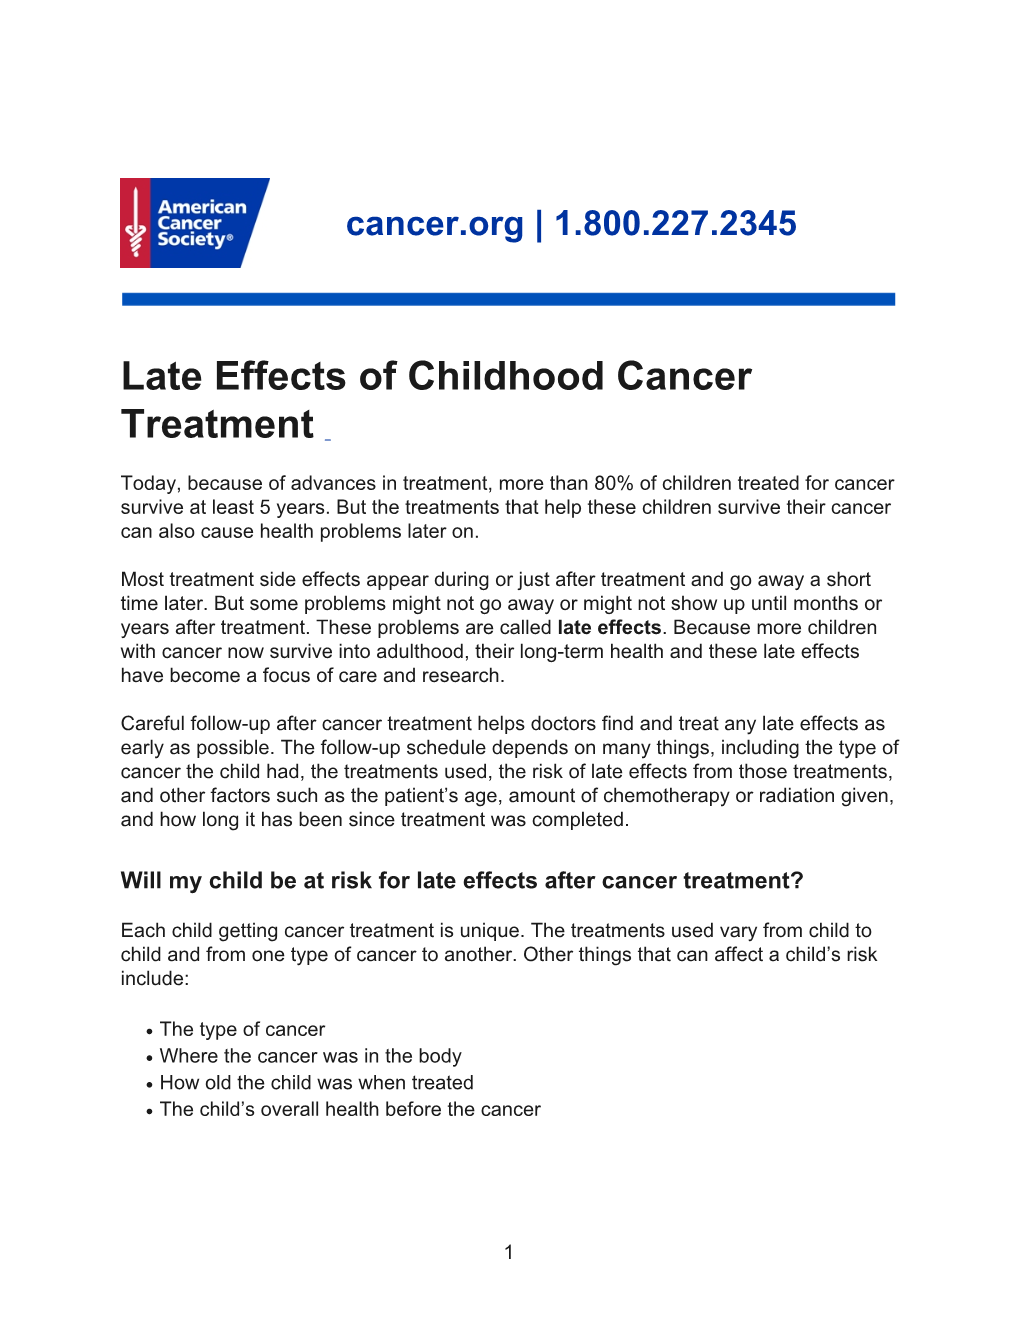 Late Effects of Childhood Cancer Treatment